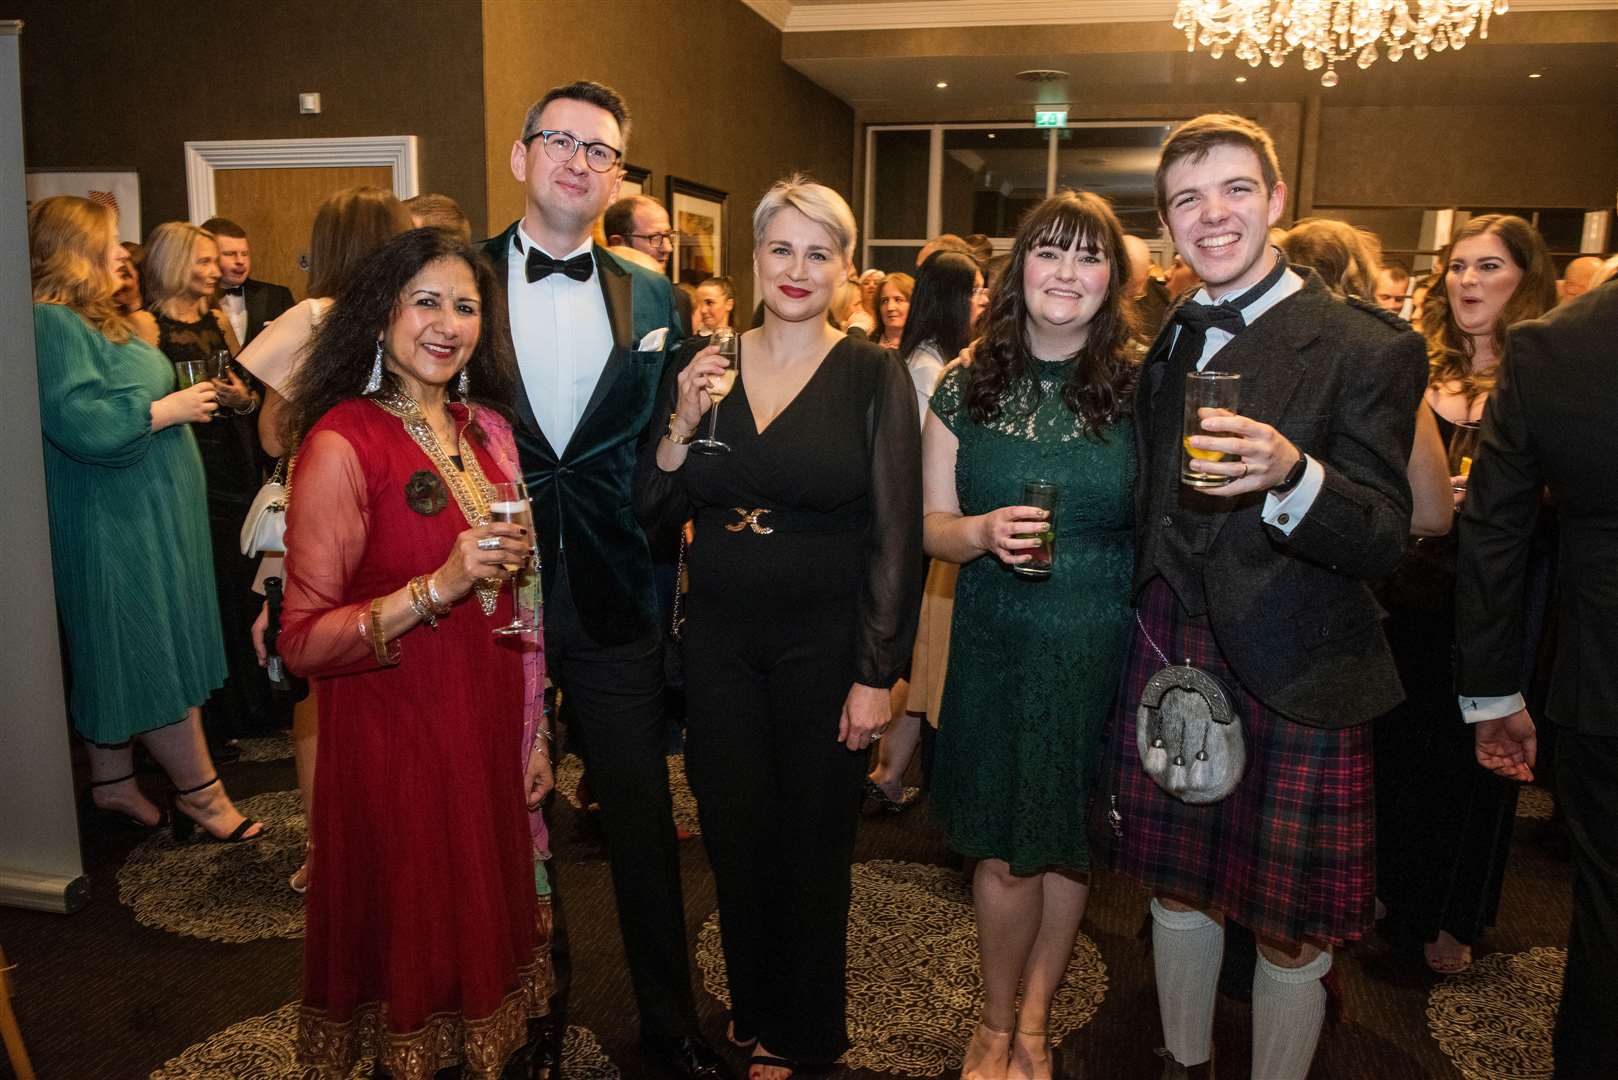 Everyone had a ball on the night. Pictures: Chris Watt Photography.